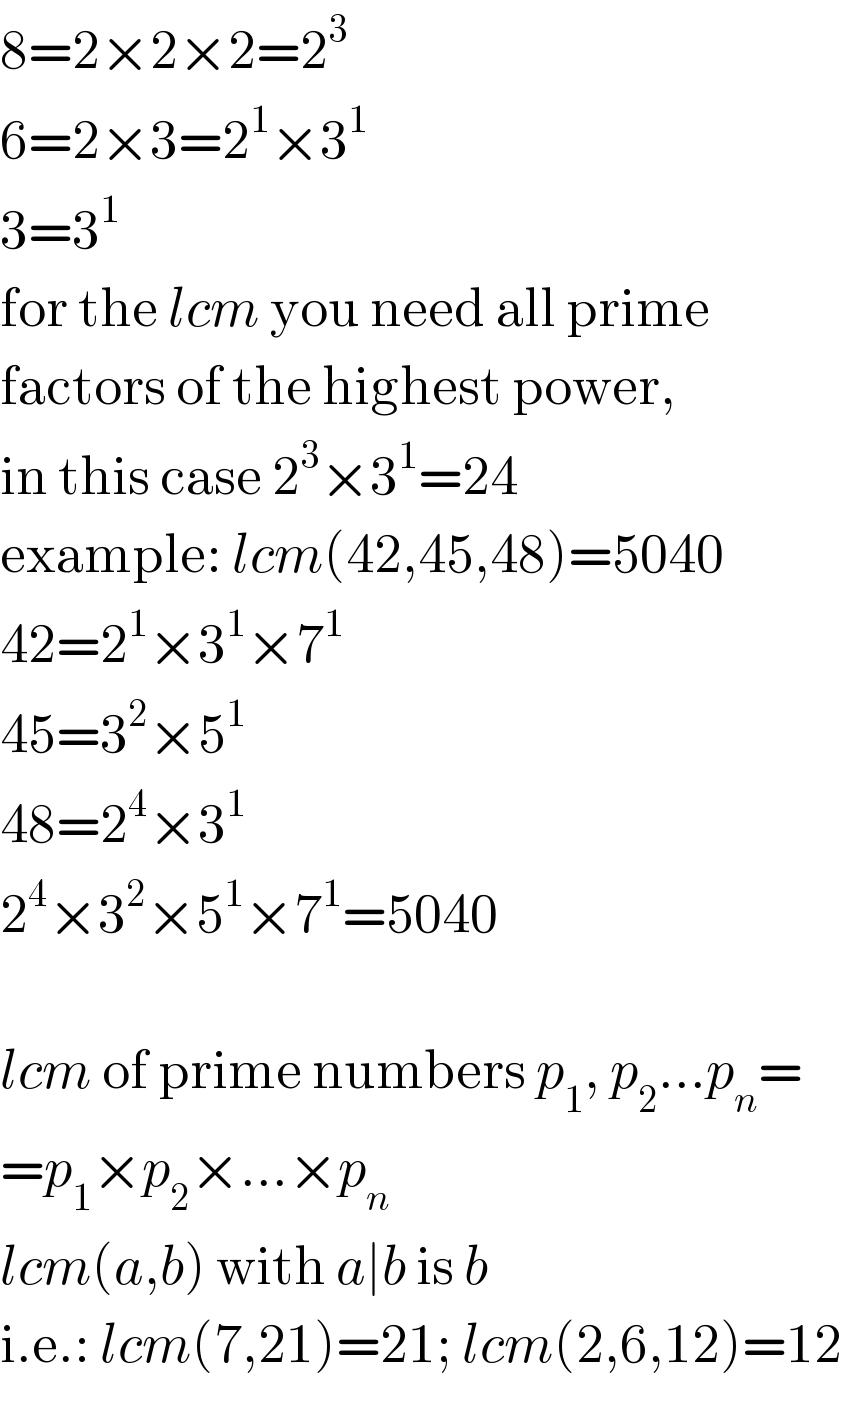 8=2×2×2=2^3   6=2×3=2^1 ×3^1   3=3^1   for the lcm you need all prime  factors of the highest power,  in this case 2^3 ×3^1 =24  example: lcm(42,45,48)=5040  42=2^1 ×3^1 ×7^1   45=3^2 ×5^1   48=2^4 ×3^1   2^4 ×3^2 ×5^1 ×7^1 =5040    lcm of prime numbers p_1 , p_2 ...p_n =  =p_1 ×p_2 ×...×p_n   lcm(a,b) with a∣b is b  i.e.: lcm(7,21)=21; lcm(2,6,12)=12  